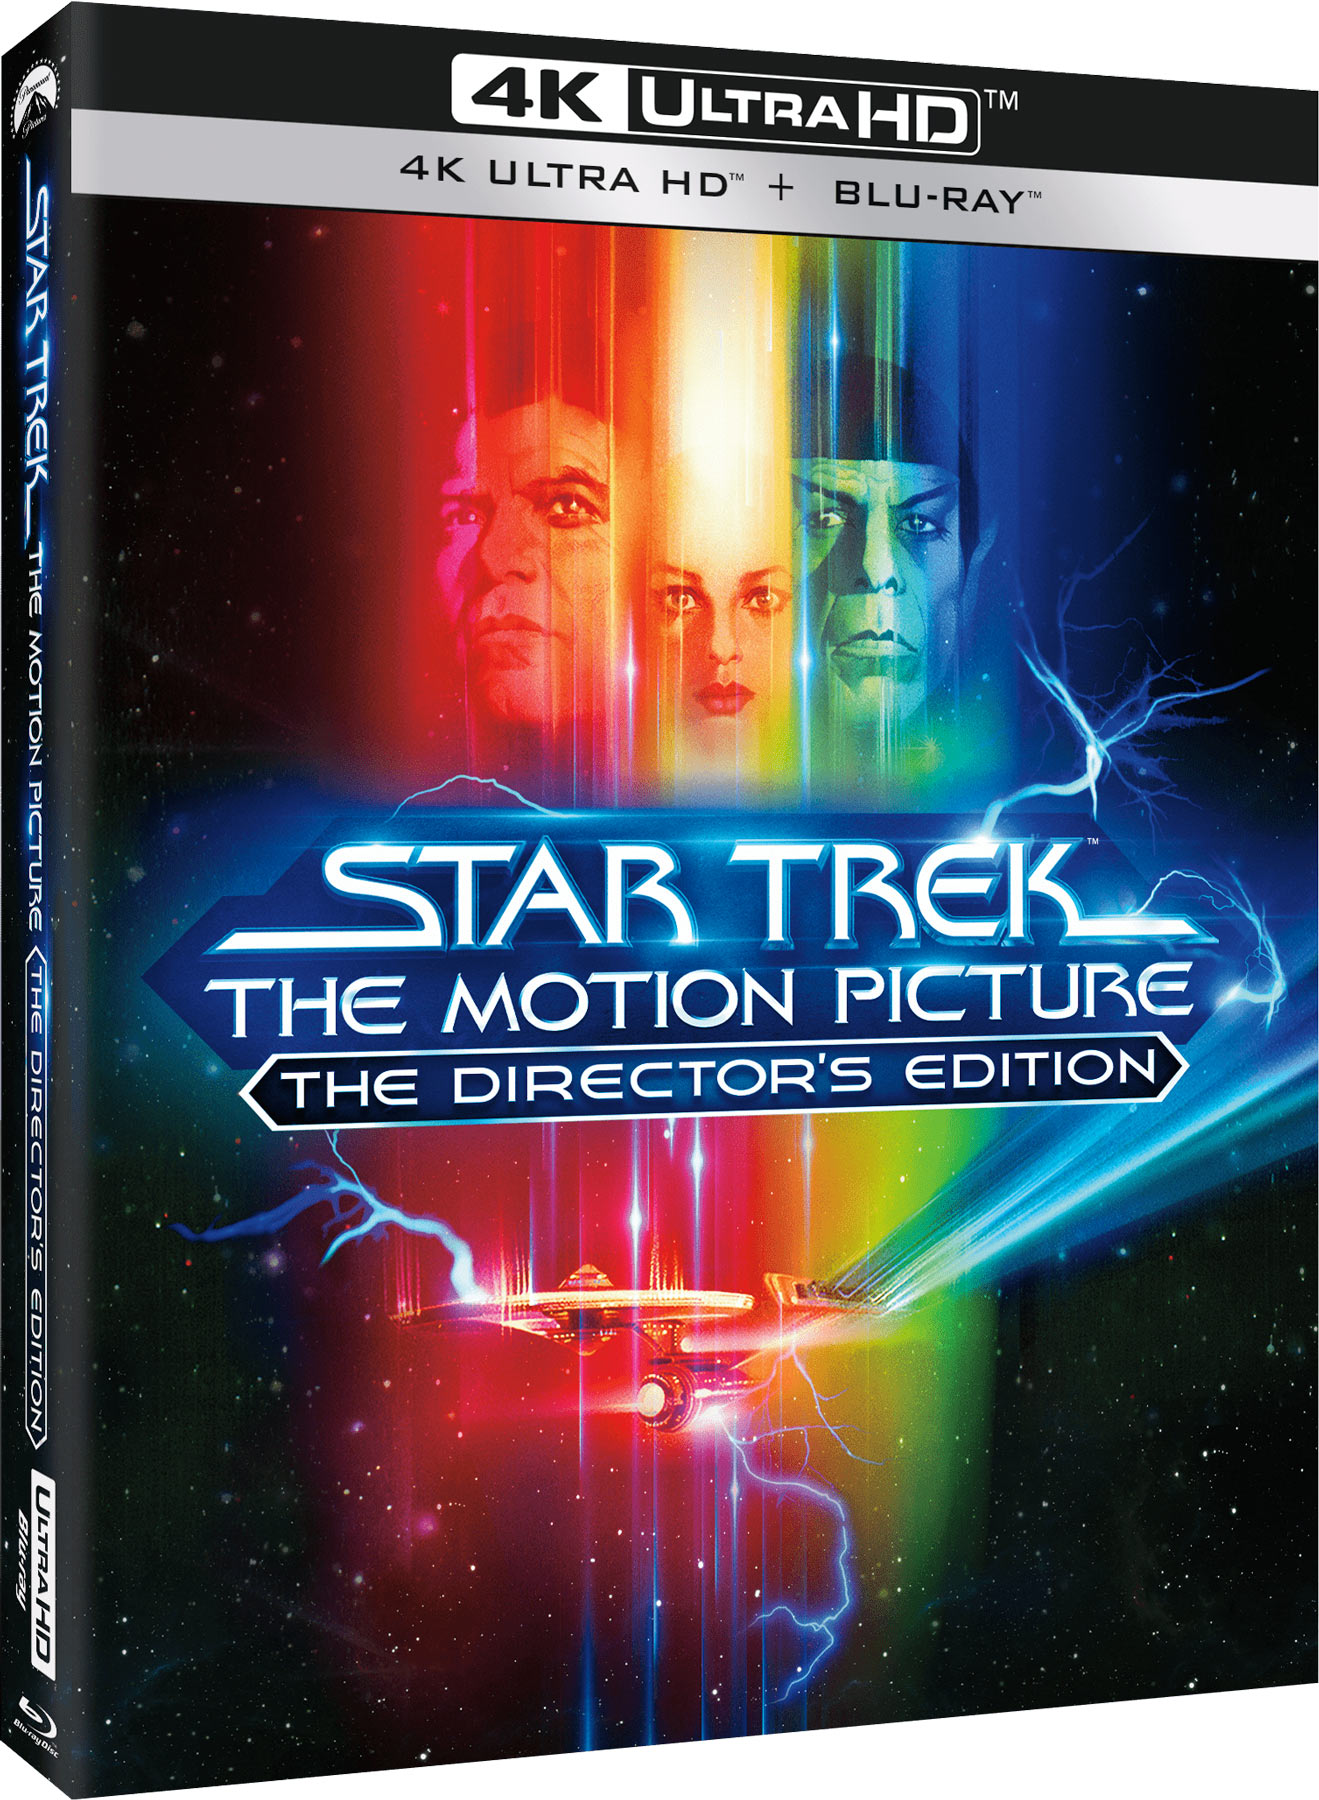 Star Trek The Motion Picture - The Director's Edition - 4K Ultra HD